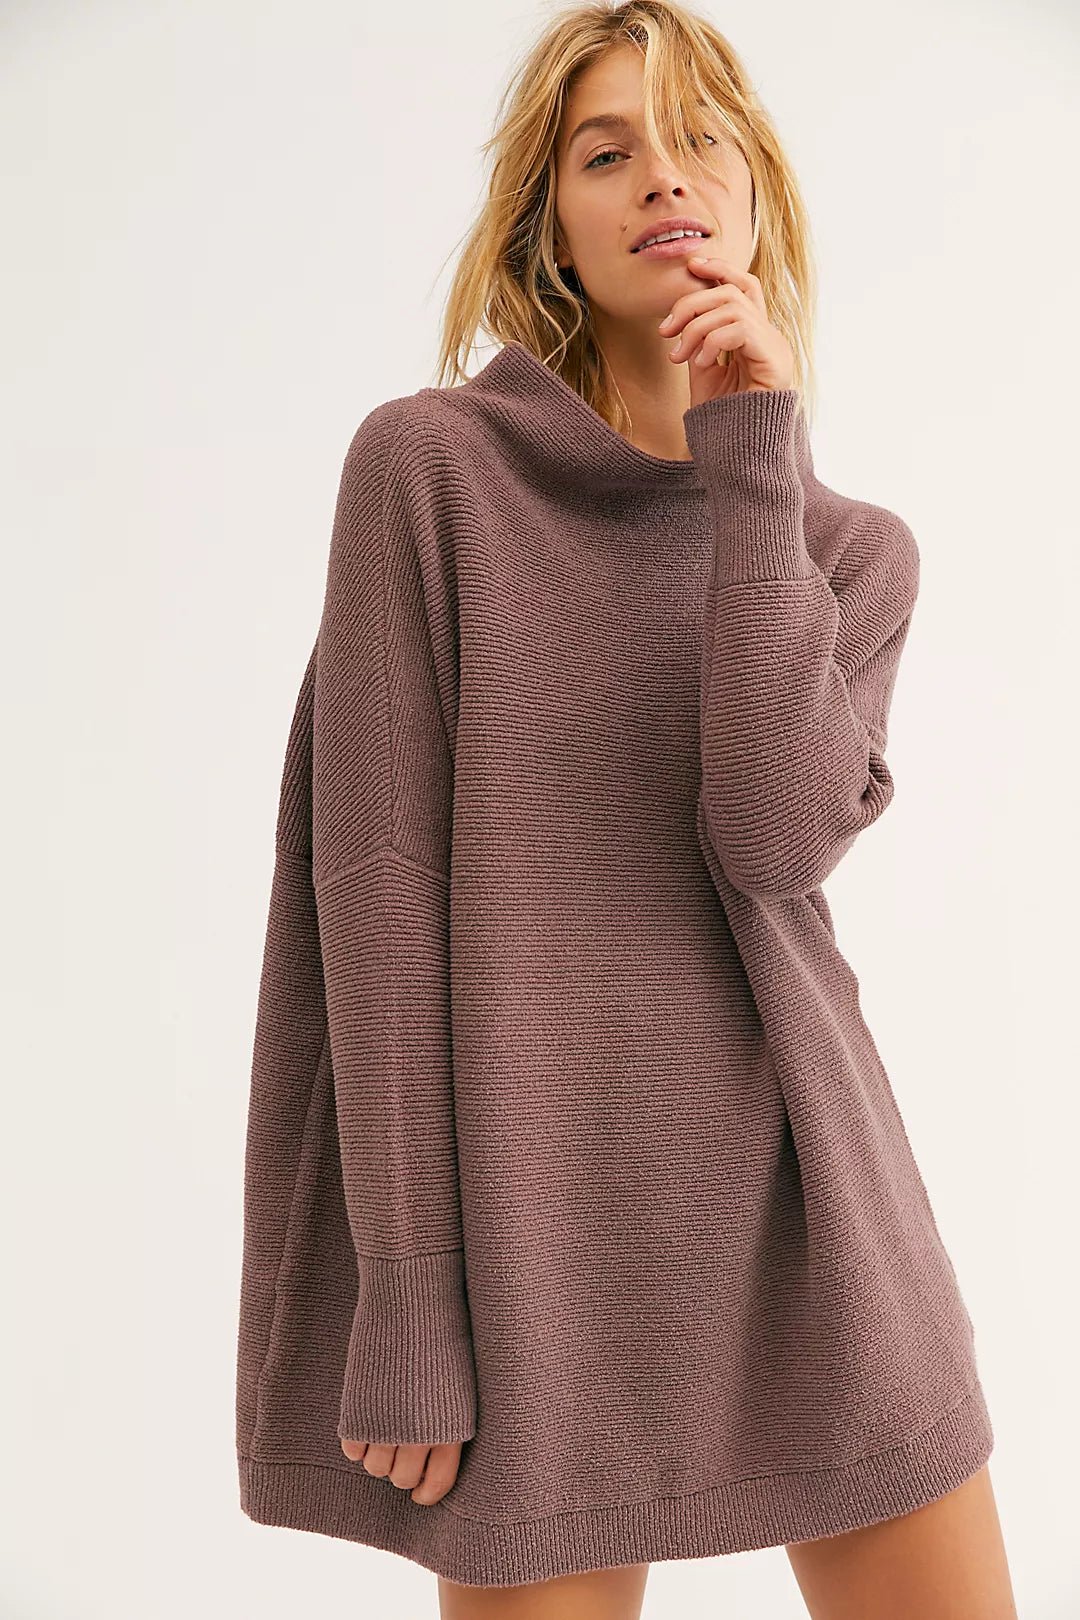 Free People Ottoman Slouchy Tunic Sweater + 10 colours